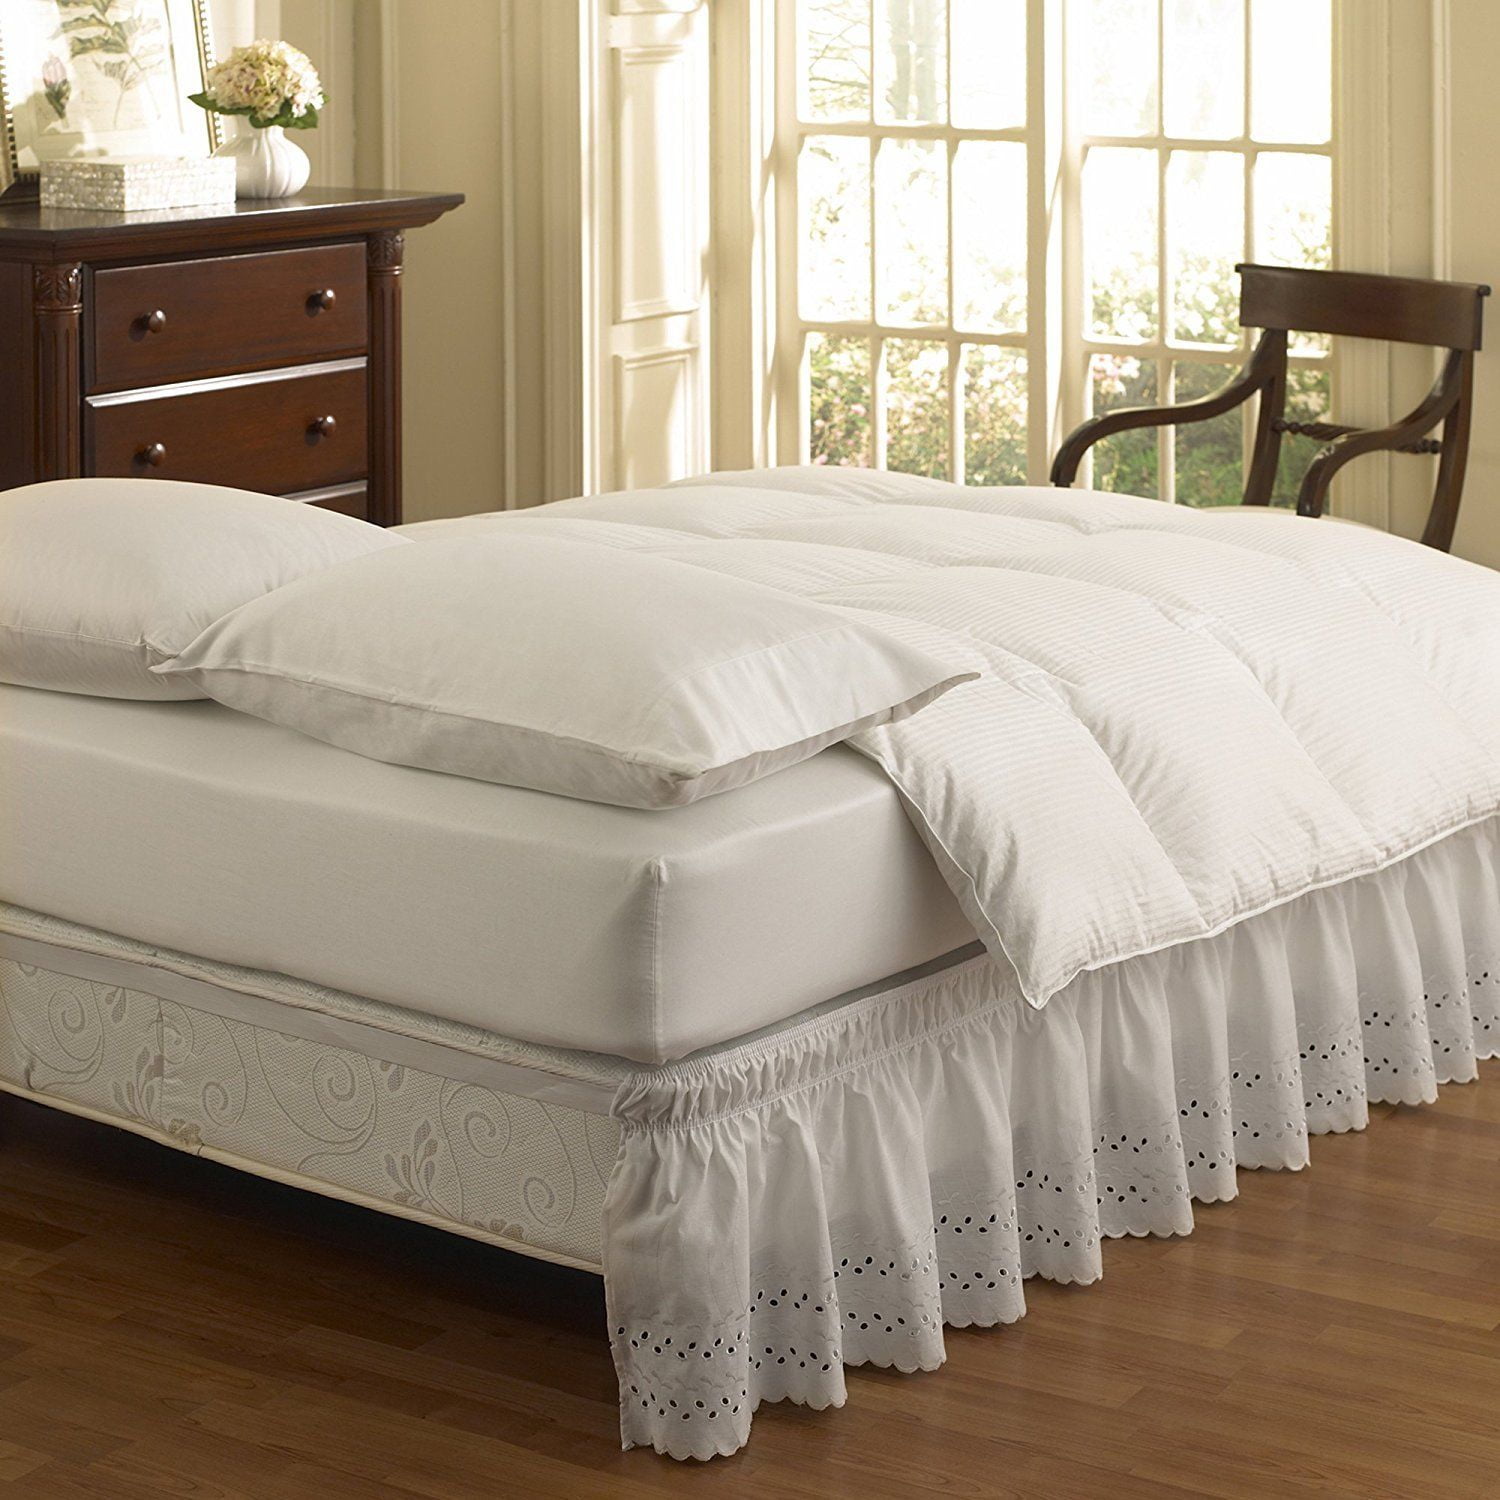 Details about   Elastic Eyelet Bed Skirts Dust Ruffle Adjustable Queen King 14 1/2 Inches Drop 